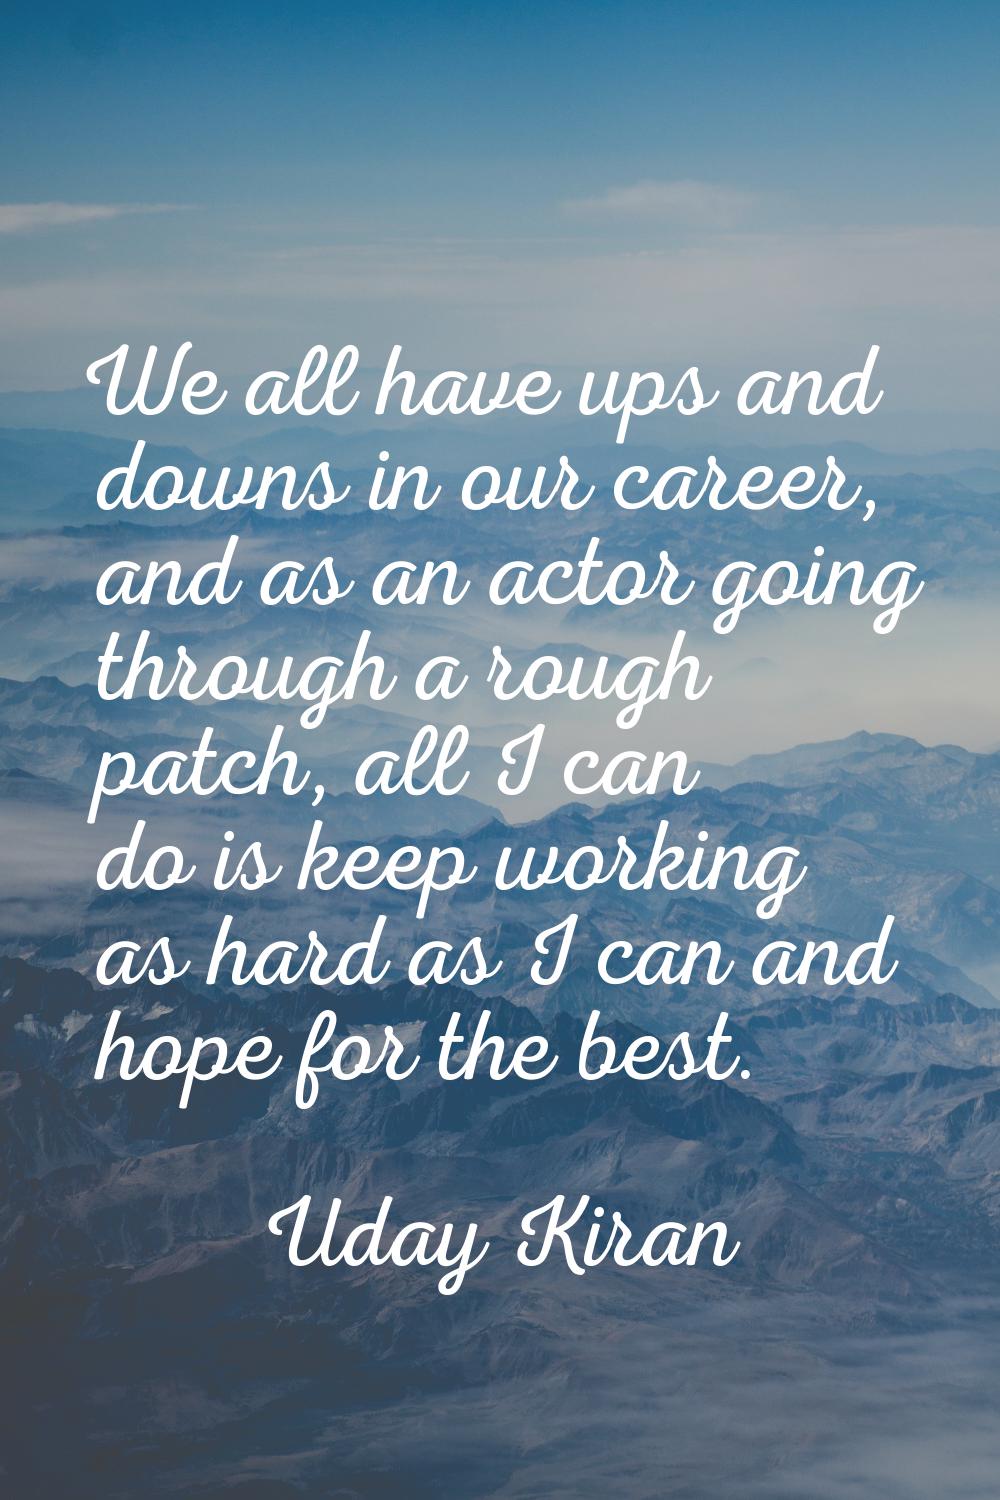 We all have ups and downs in our career, and as an actor going through a rough patch, all I can do 